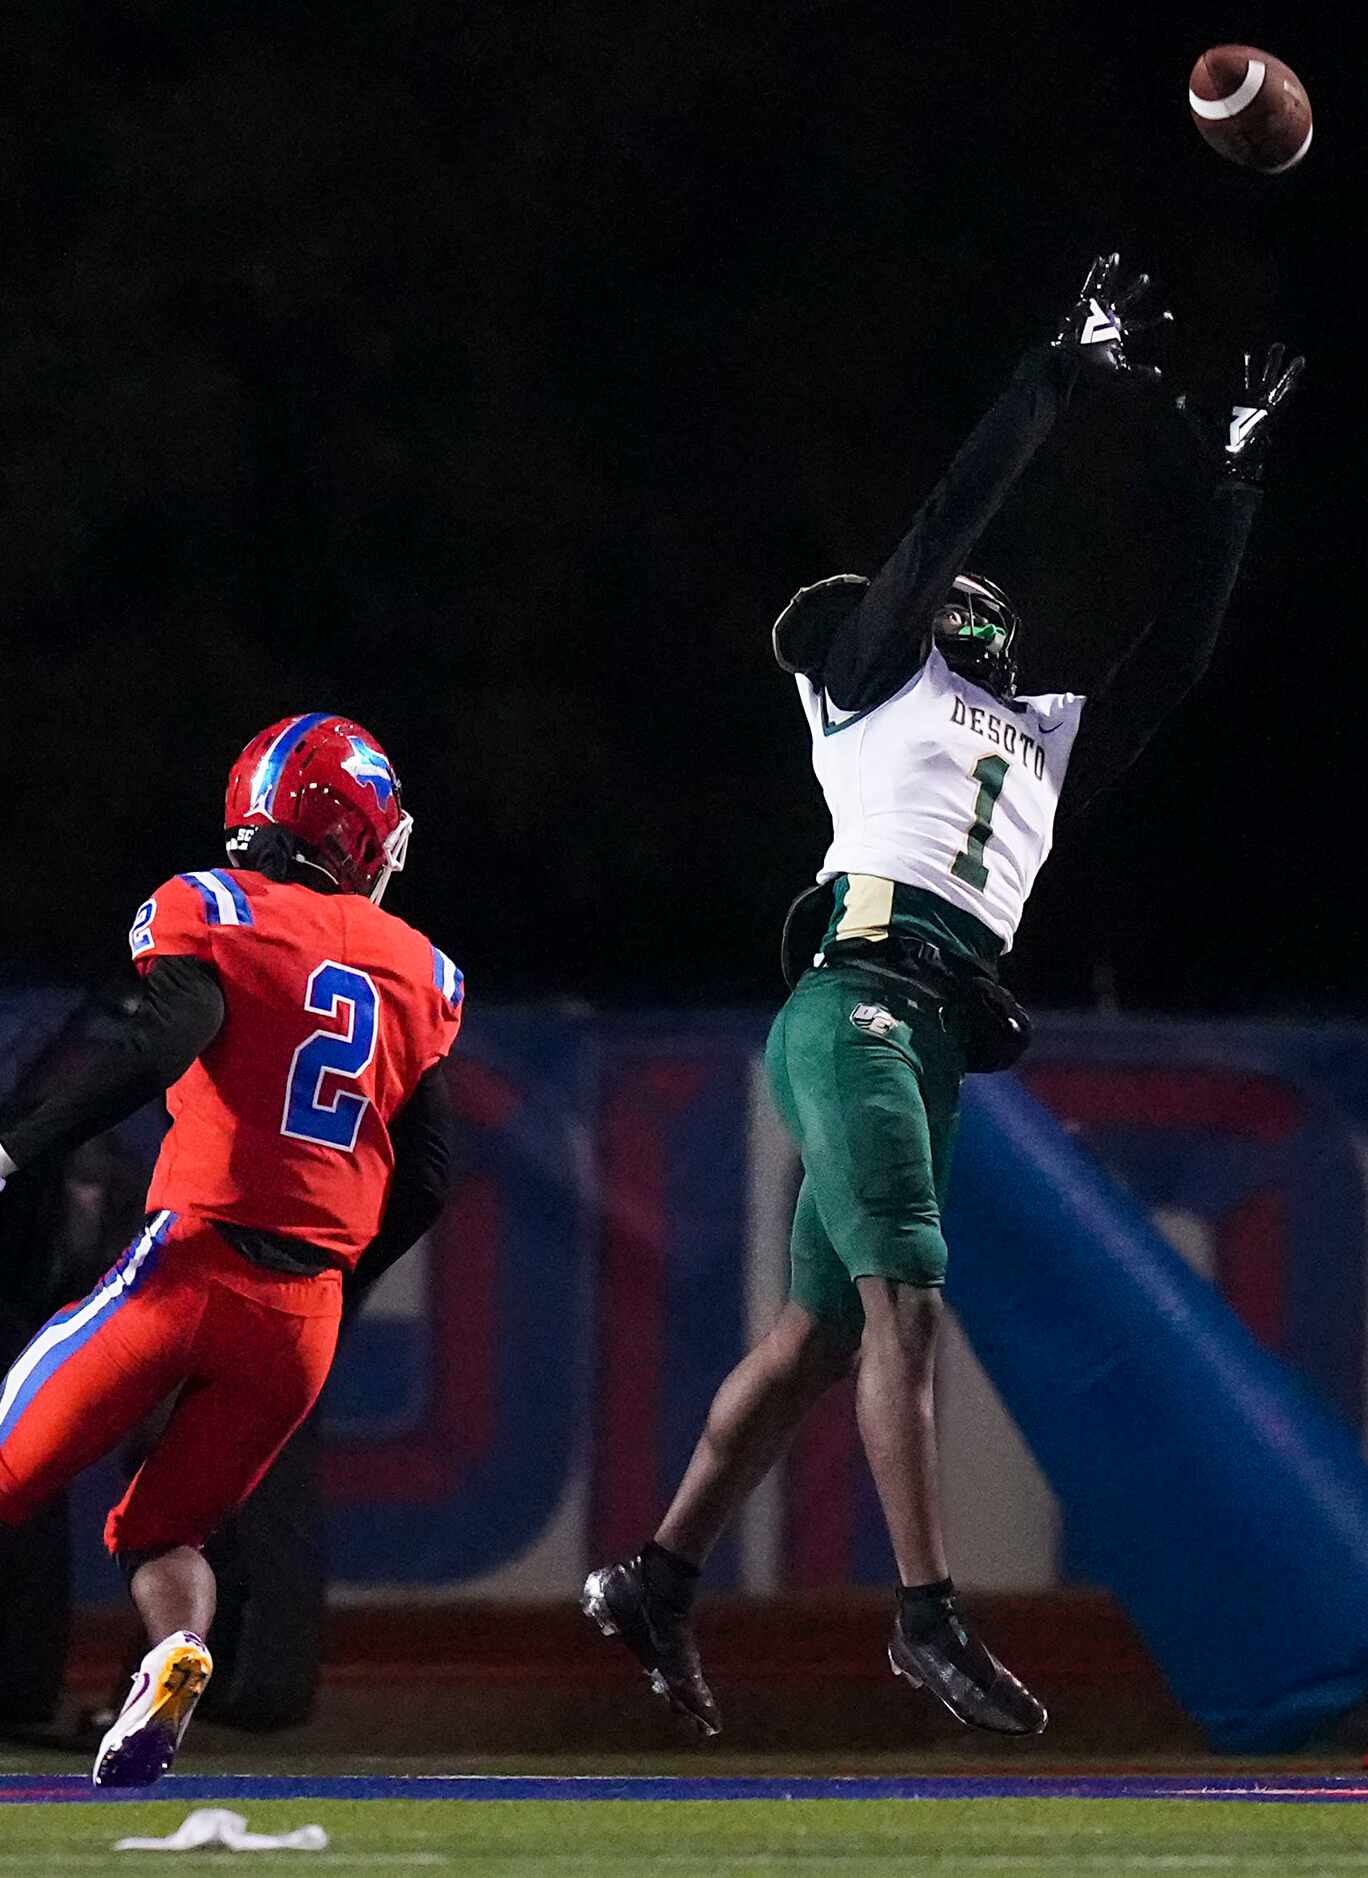 A pass sails out of the reach of DeSoto wide receiver Johntay Cook II (1) as Duncanville...